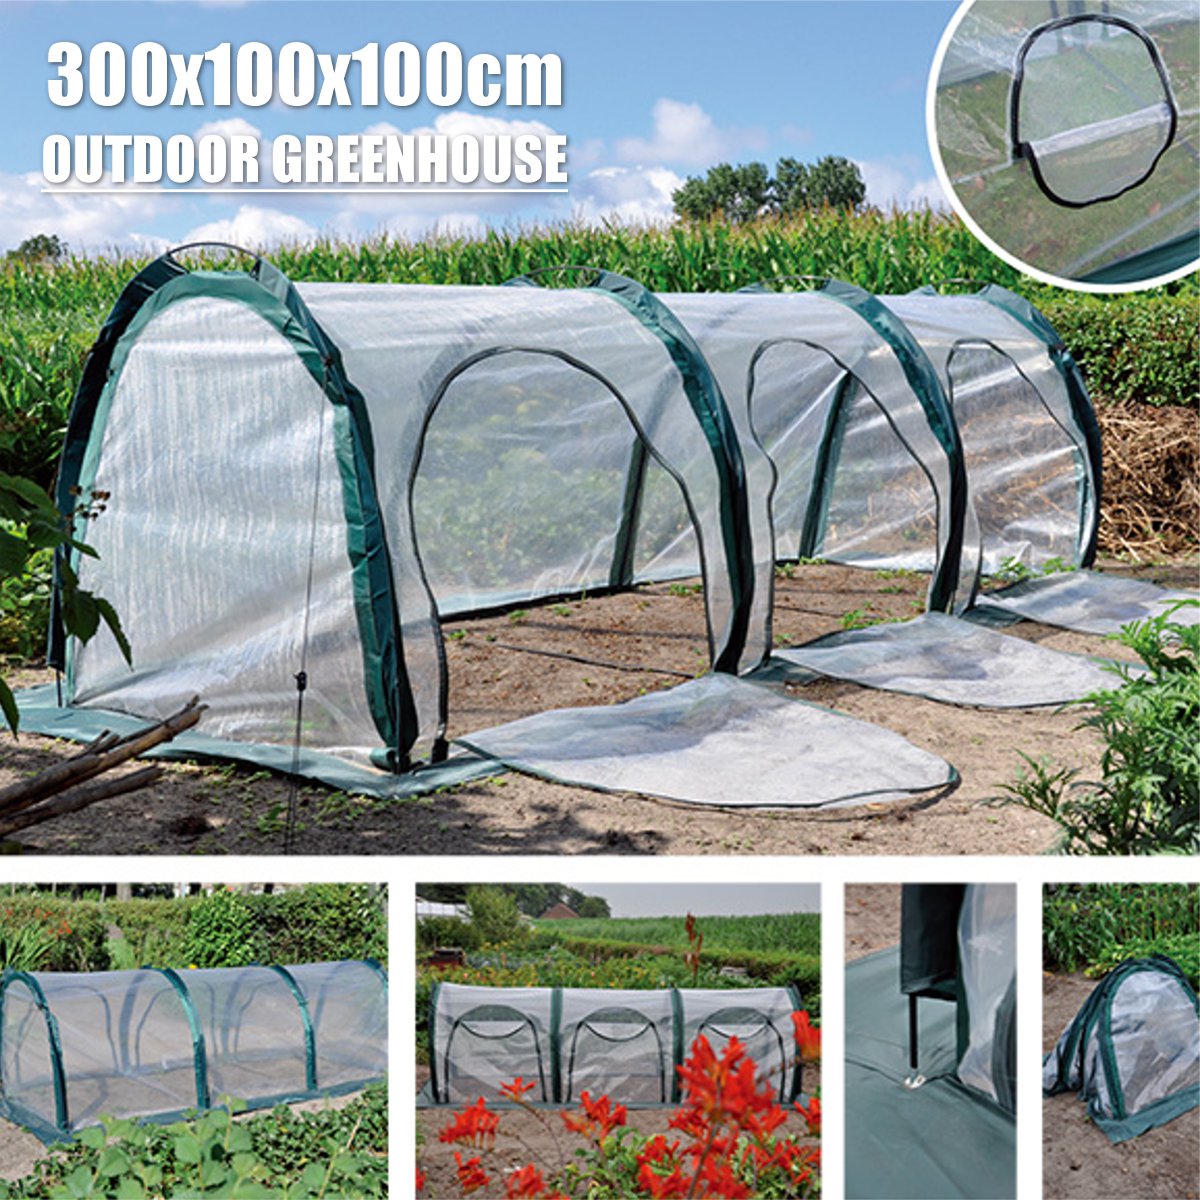 200x100x100cm-PVC-Garden-Greenhouse-Cover-Waterproof-Protects-Plants-Flowers-Planting-Heat-Proof-Col-1712540-1